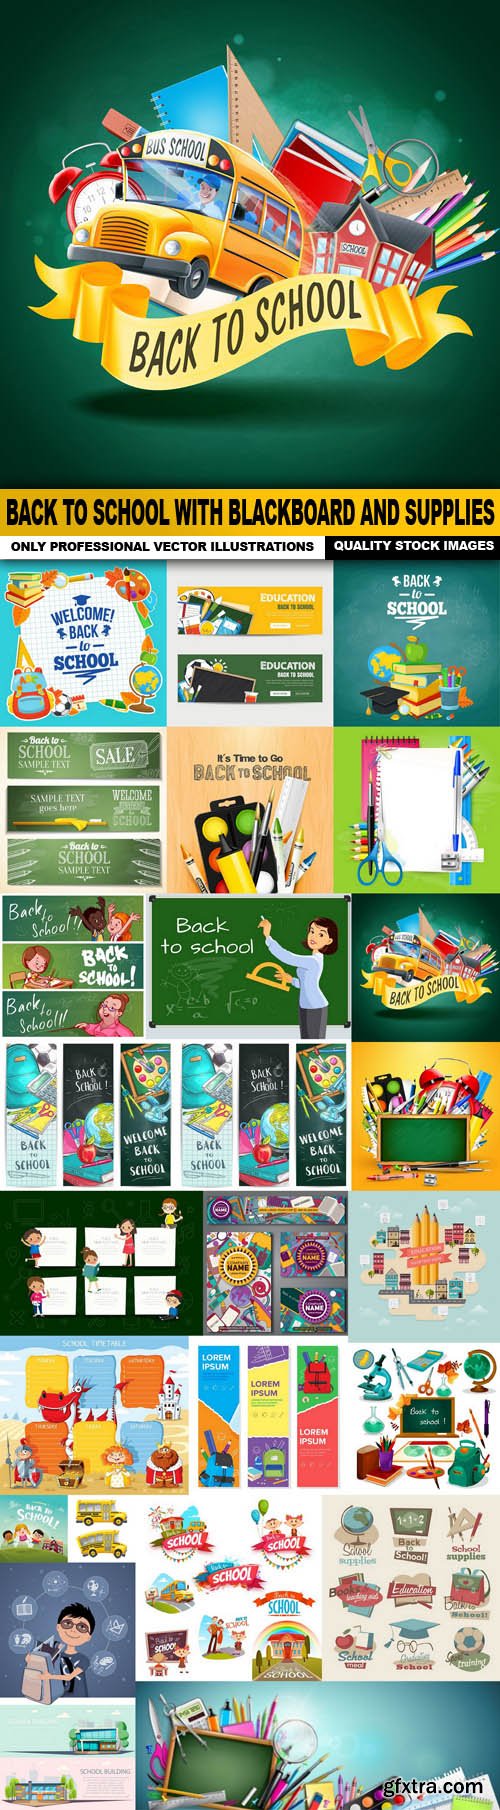 Back To School With Blackboard And Supplies - 25 Vector